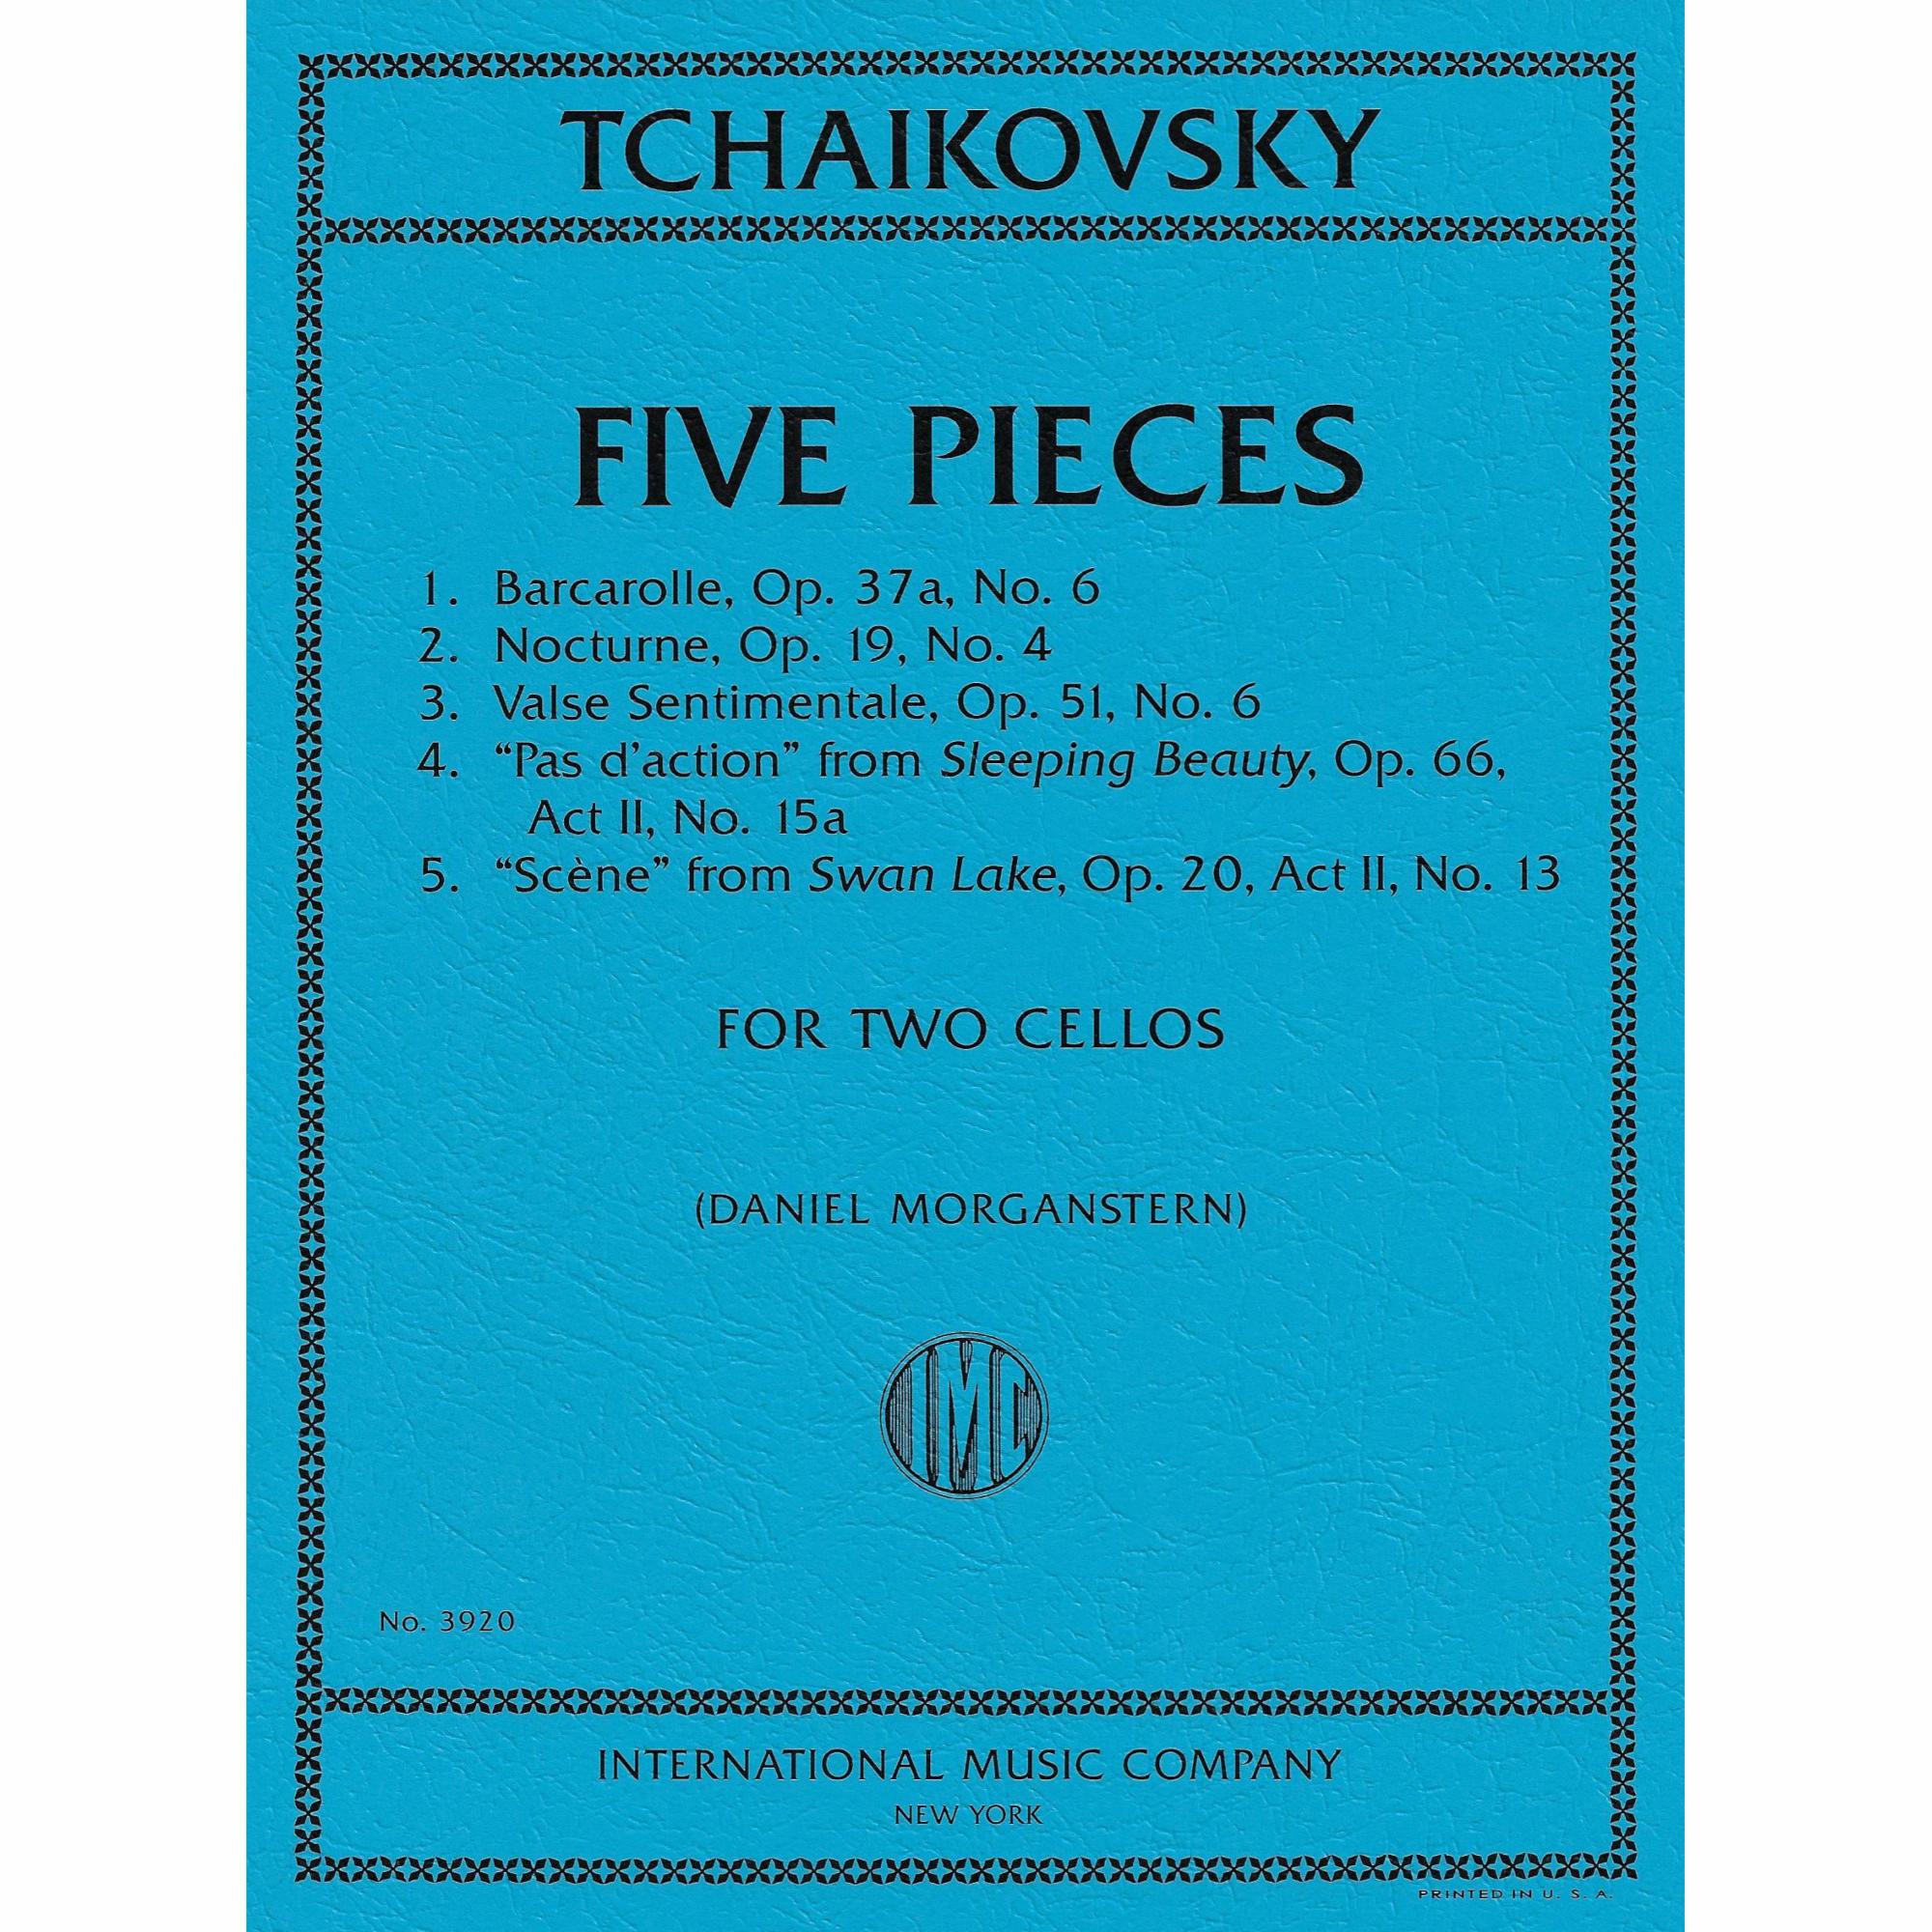 Tchaikovsky -- Five Pieces for Two Cellos